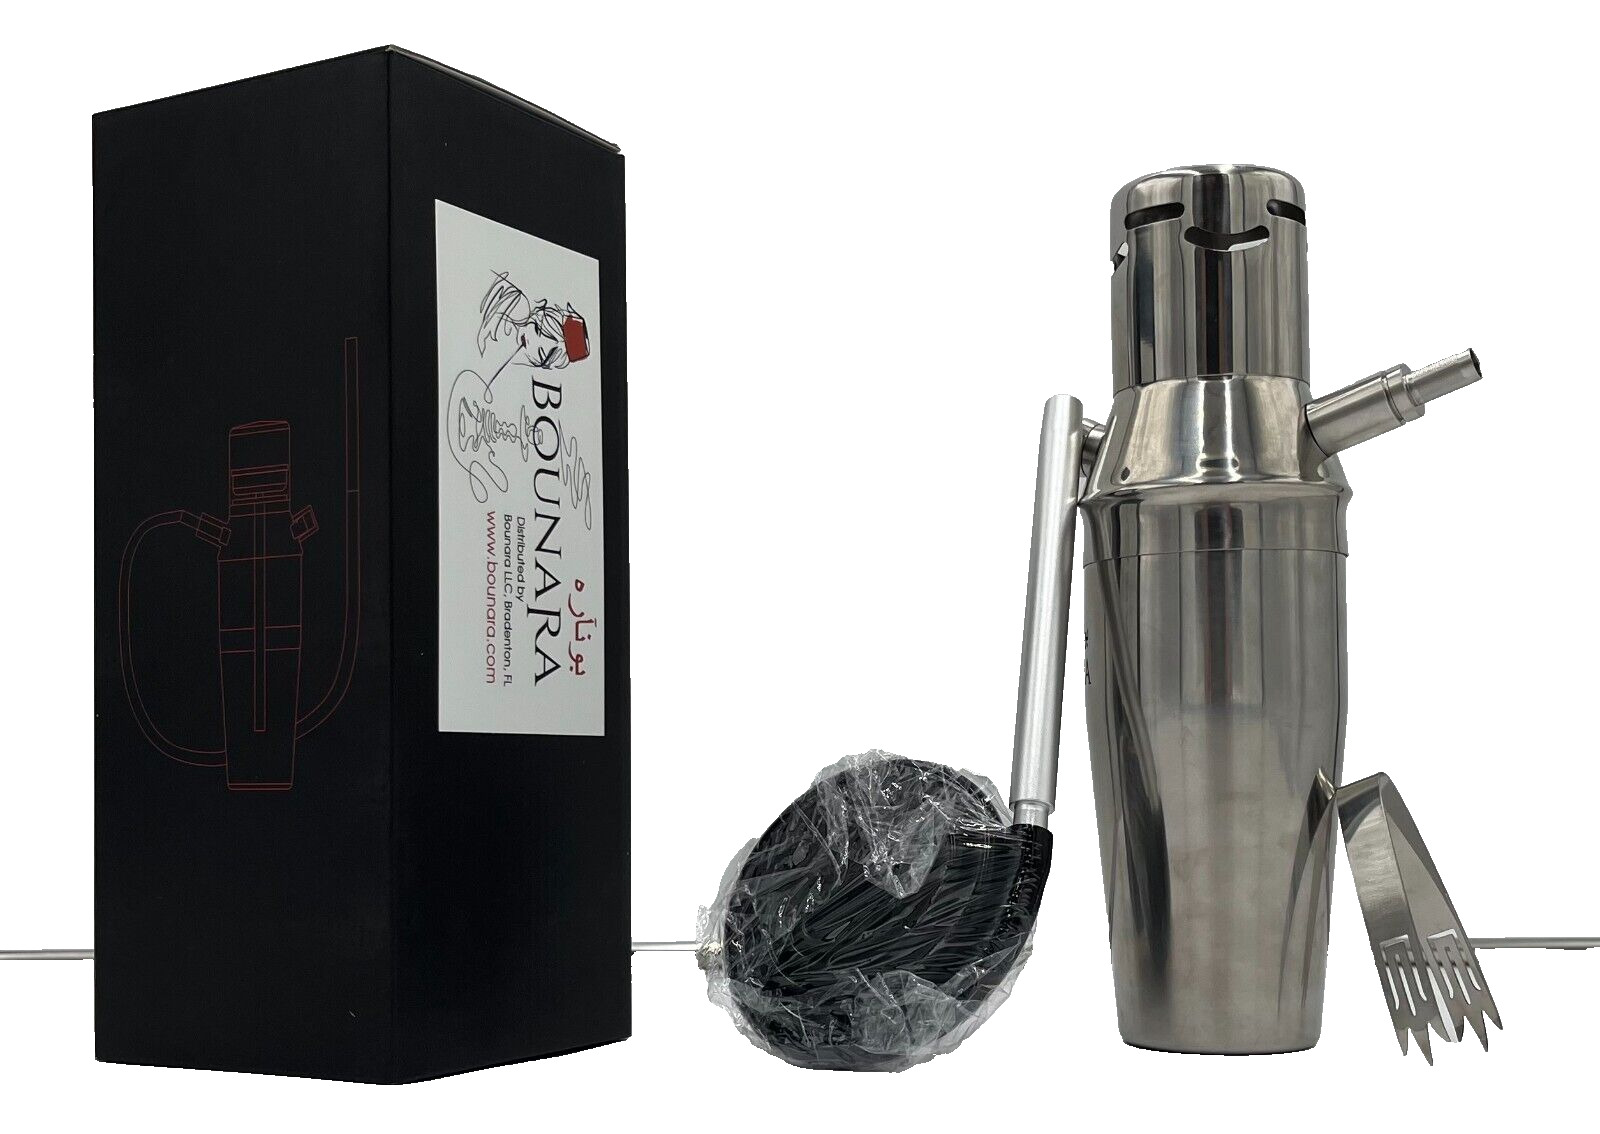 Portable stylish Shisha, Hookah,  All Stainless Steel Durable. Take it anywhere.